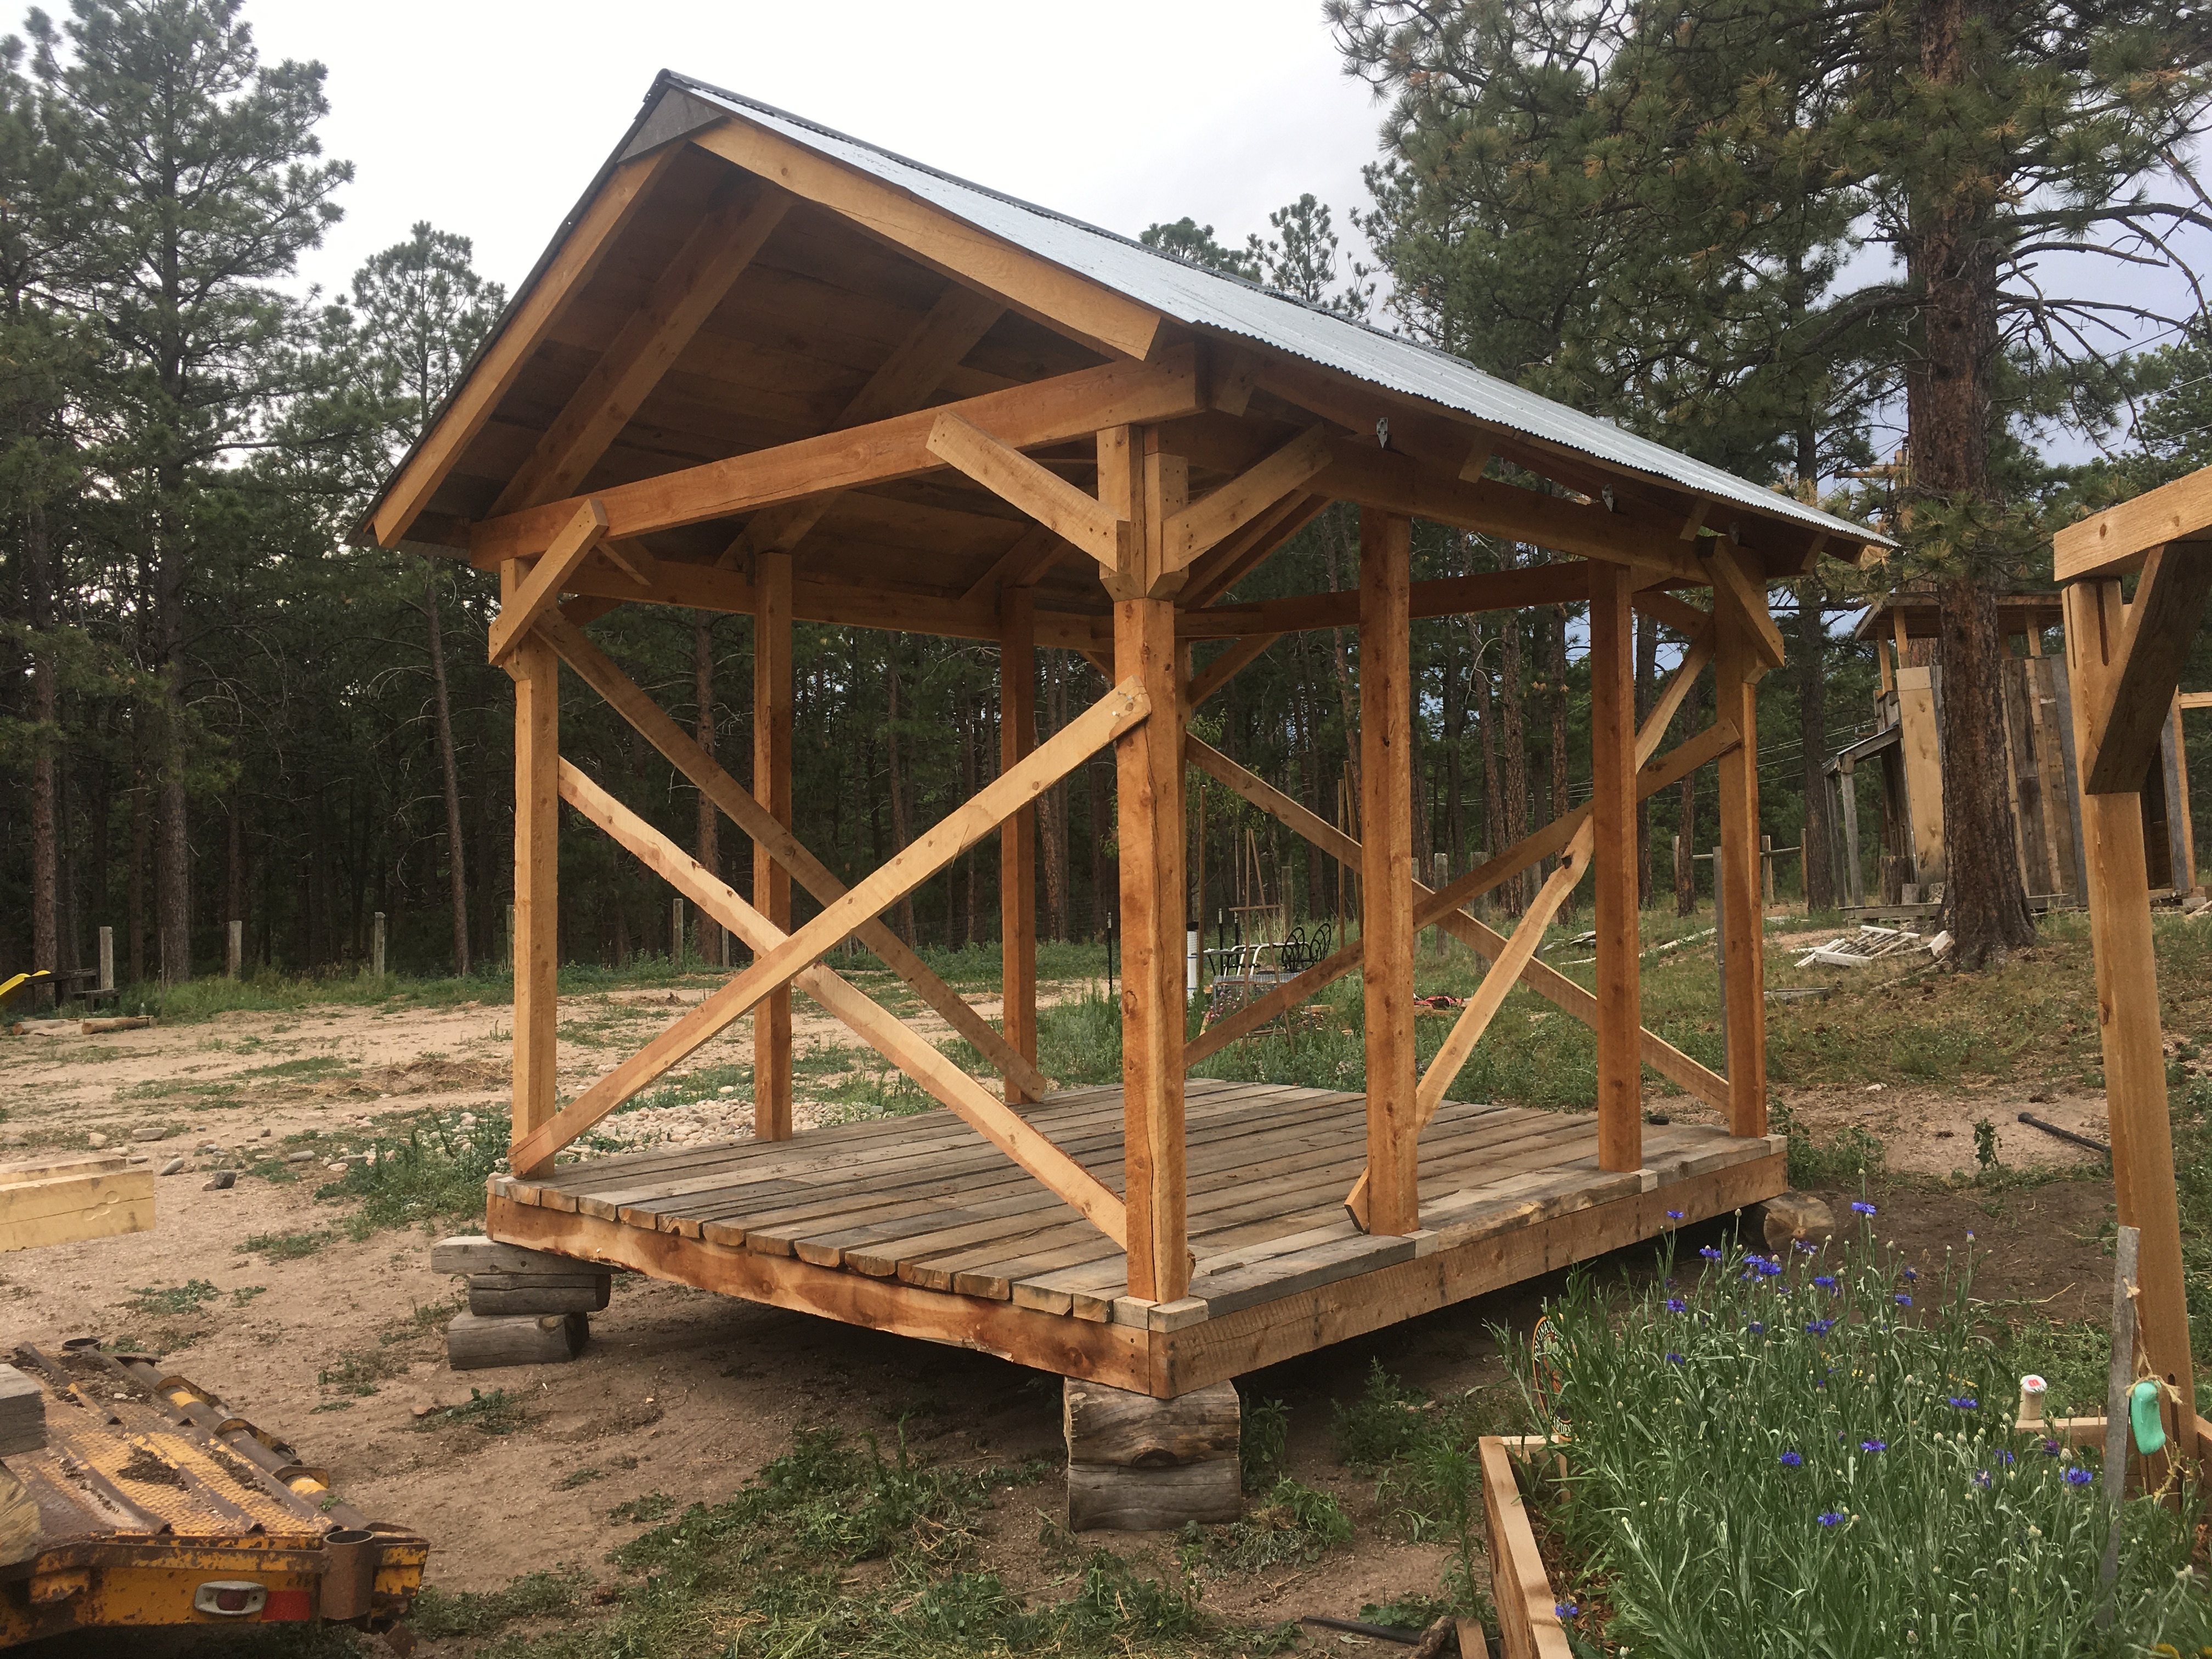 pavilion made from rough cut lumber